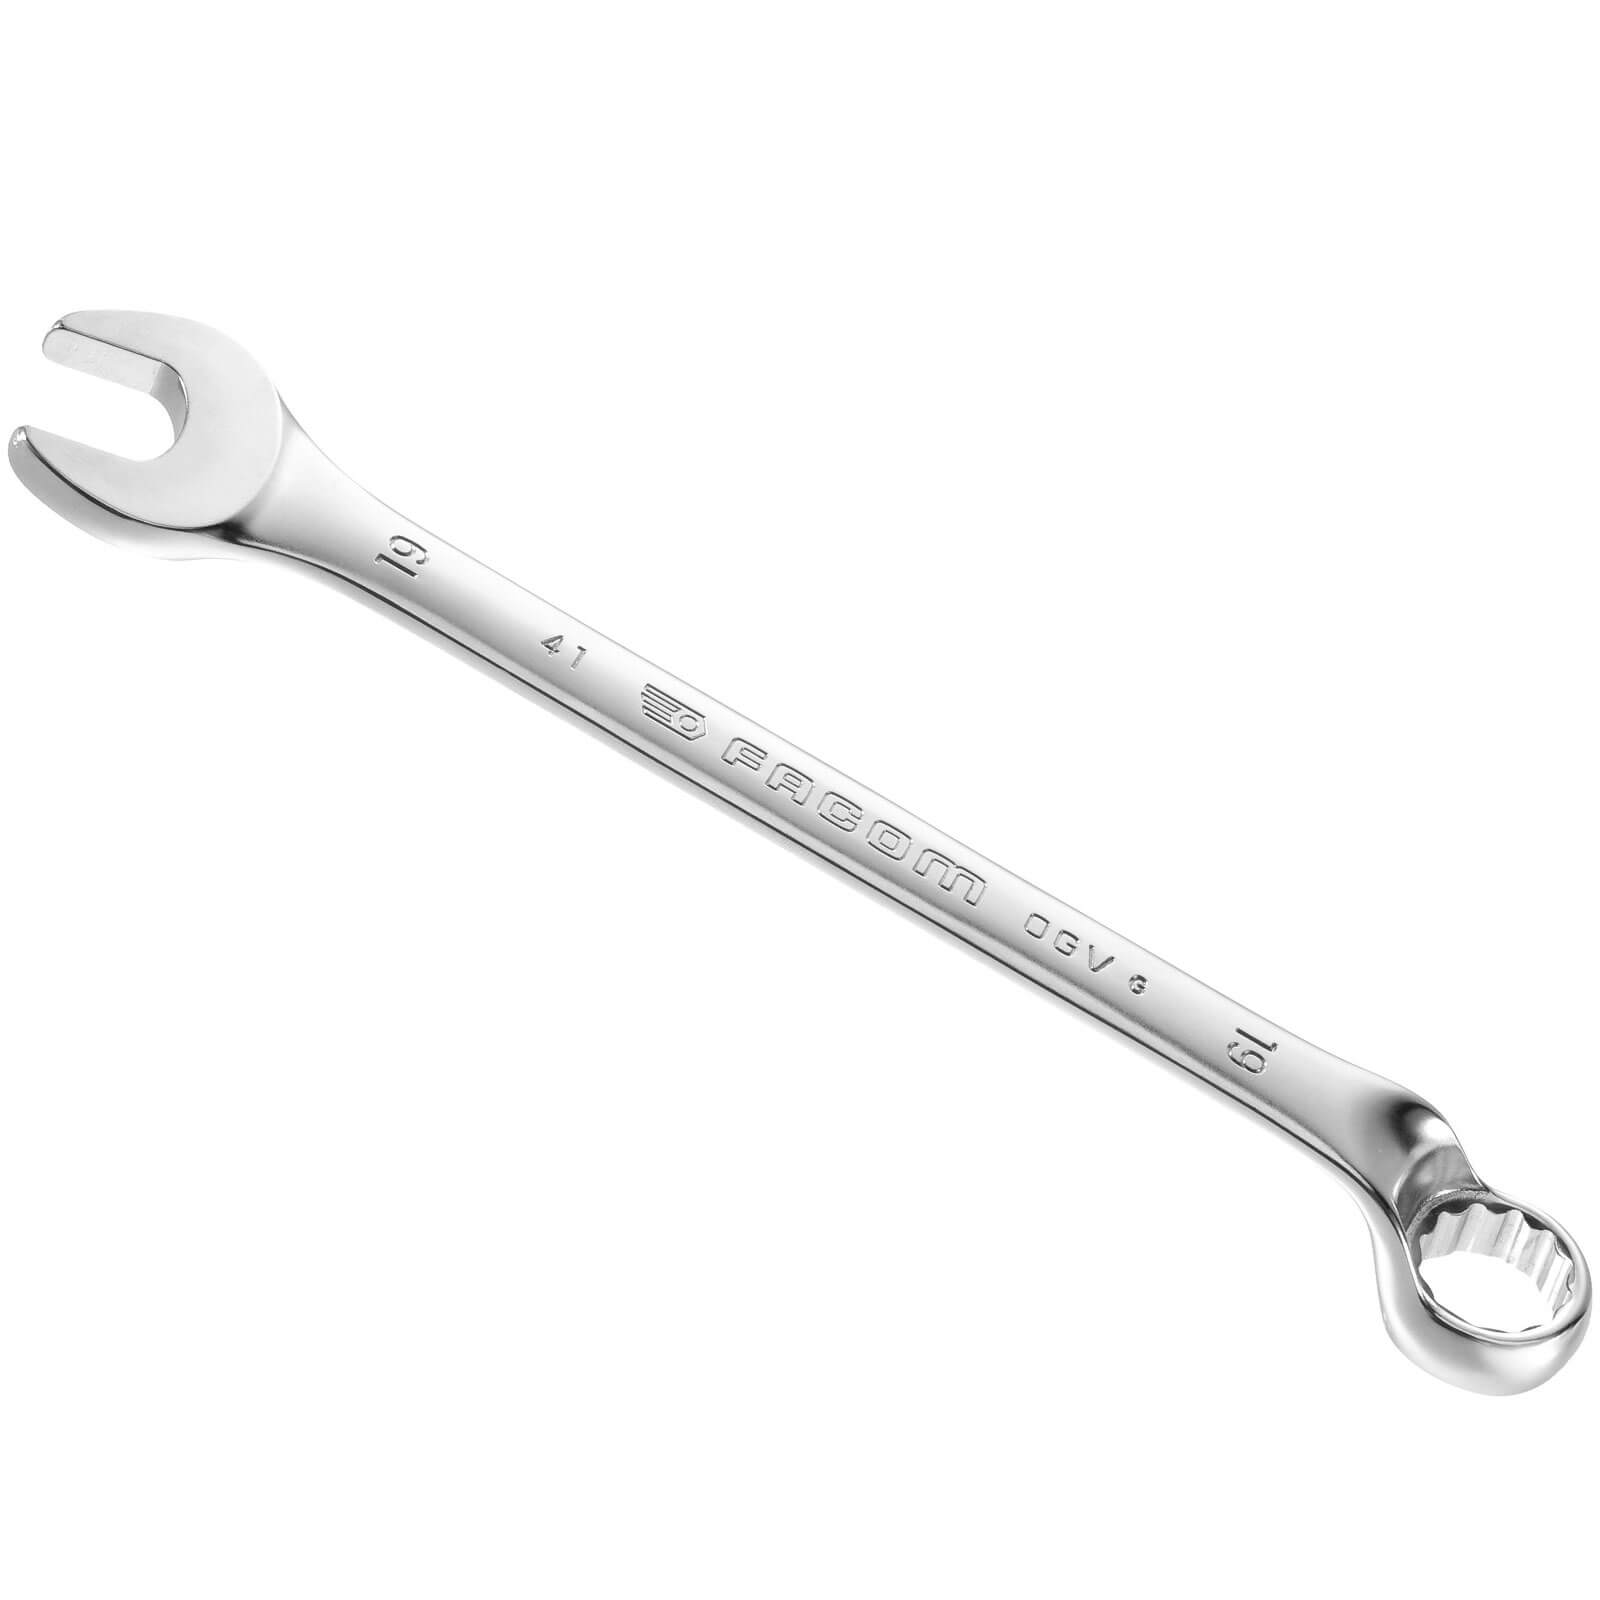 Photo of Facom 41 Series Offset Combination Spanner Metric 6mm